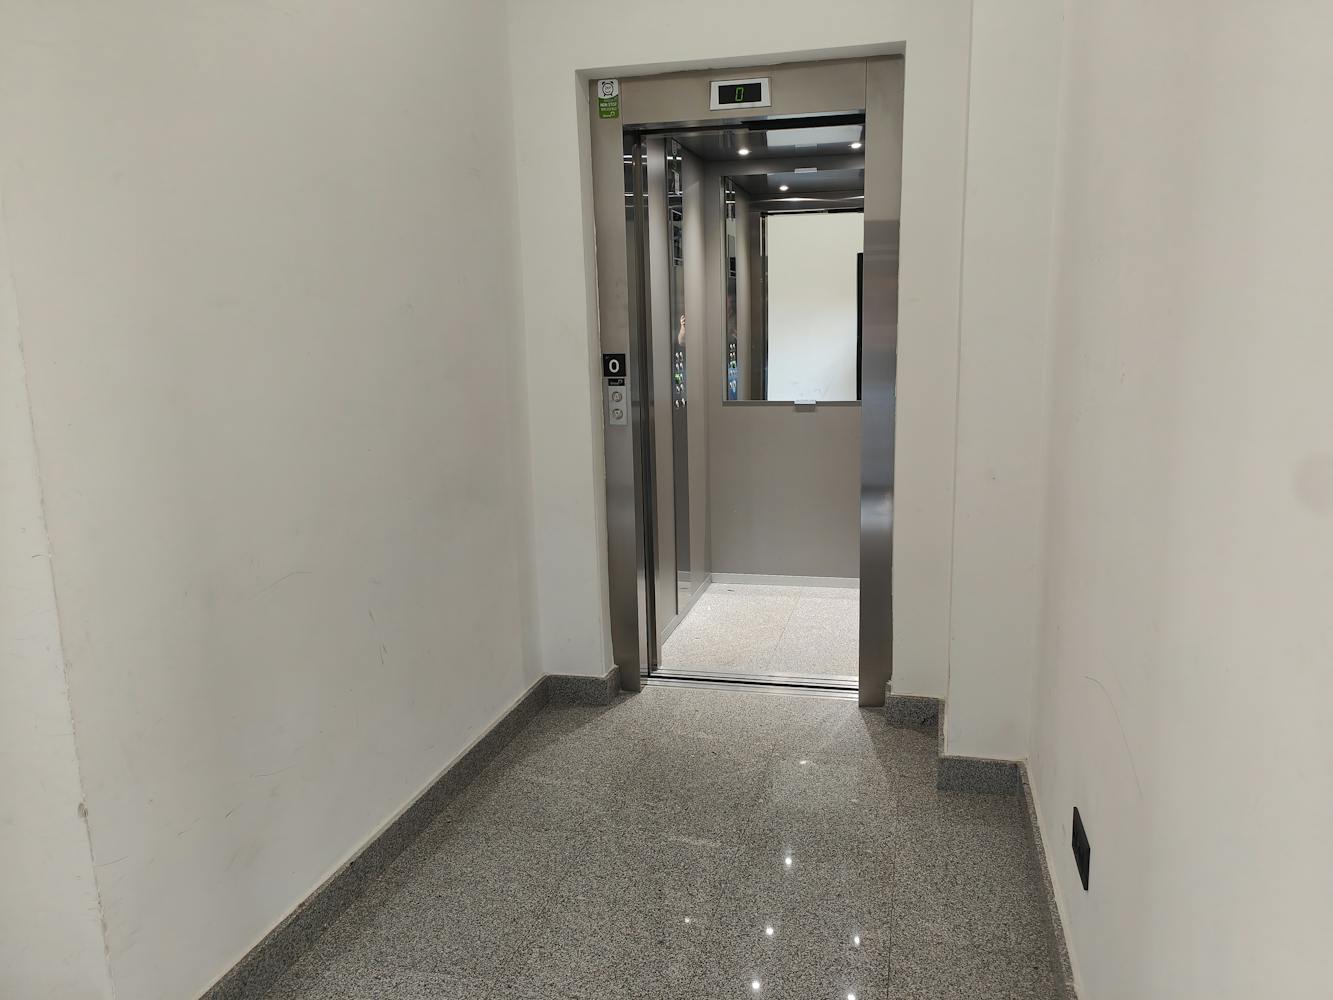 Photo of the lifts in a flat for rent